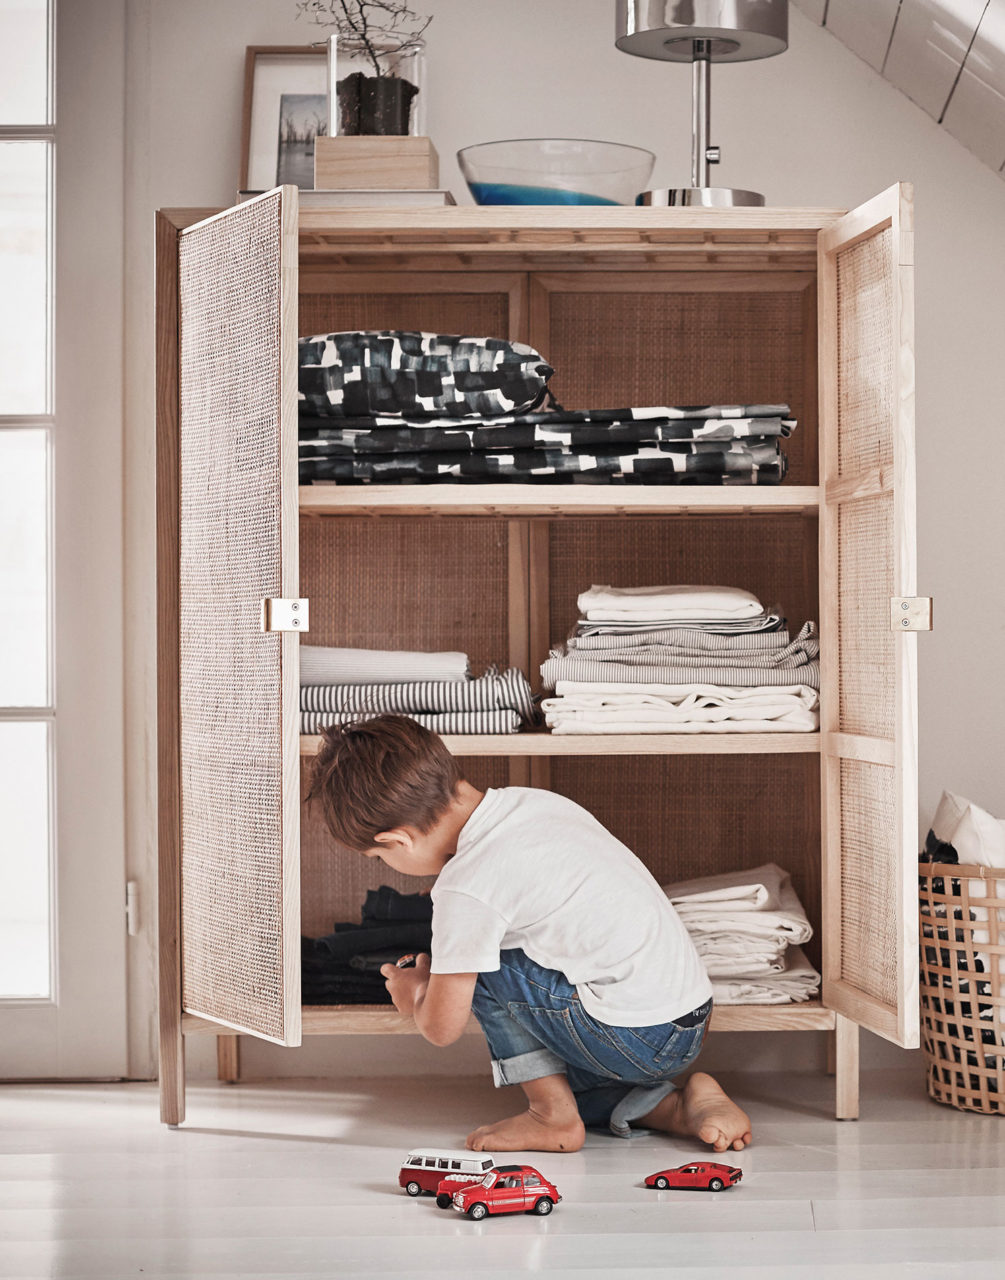 Small boy squatting by open linen cupboard made of light wood. On the floor are some small red toy cars.